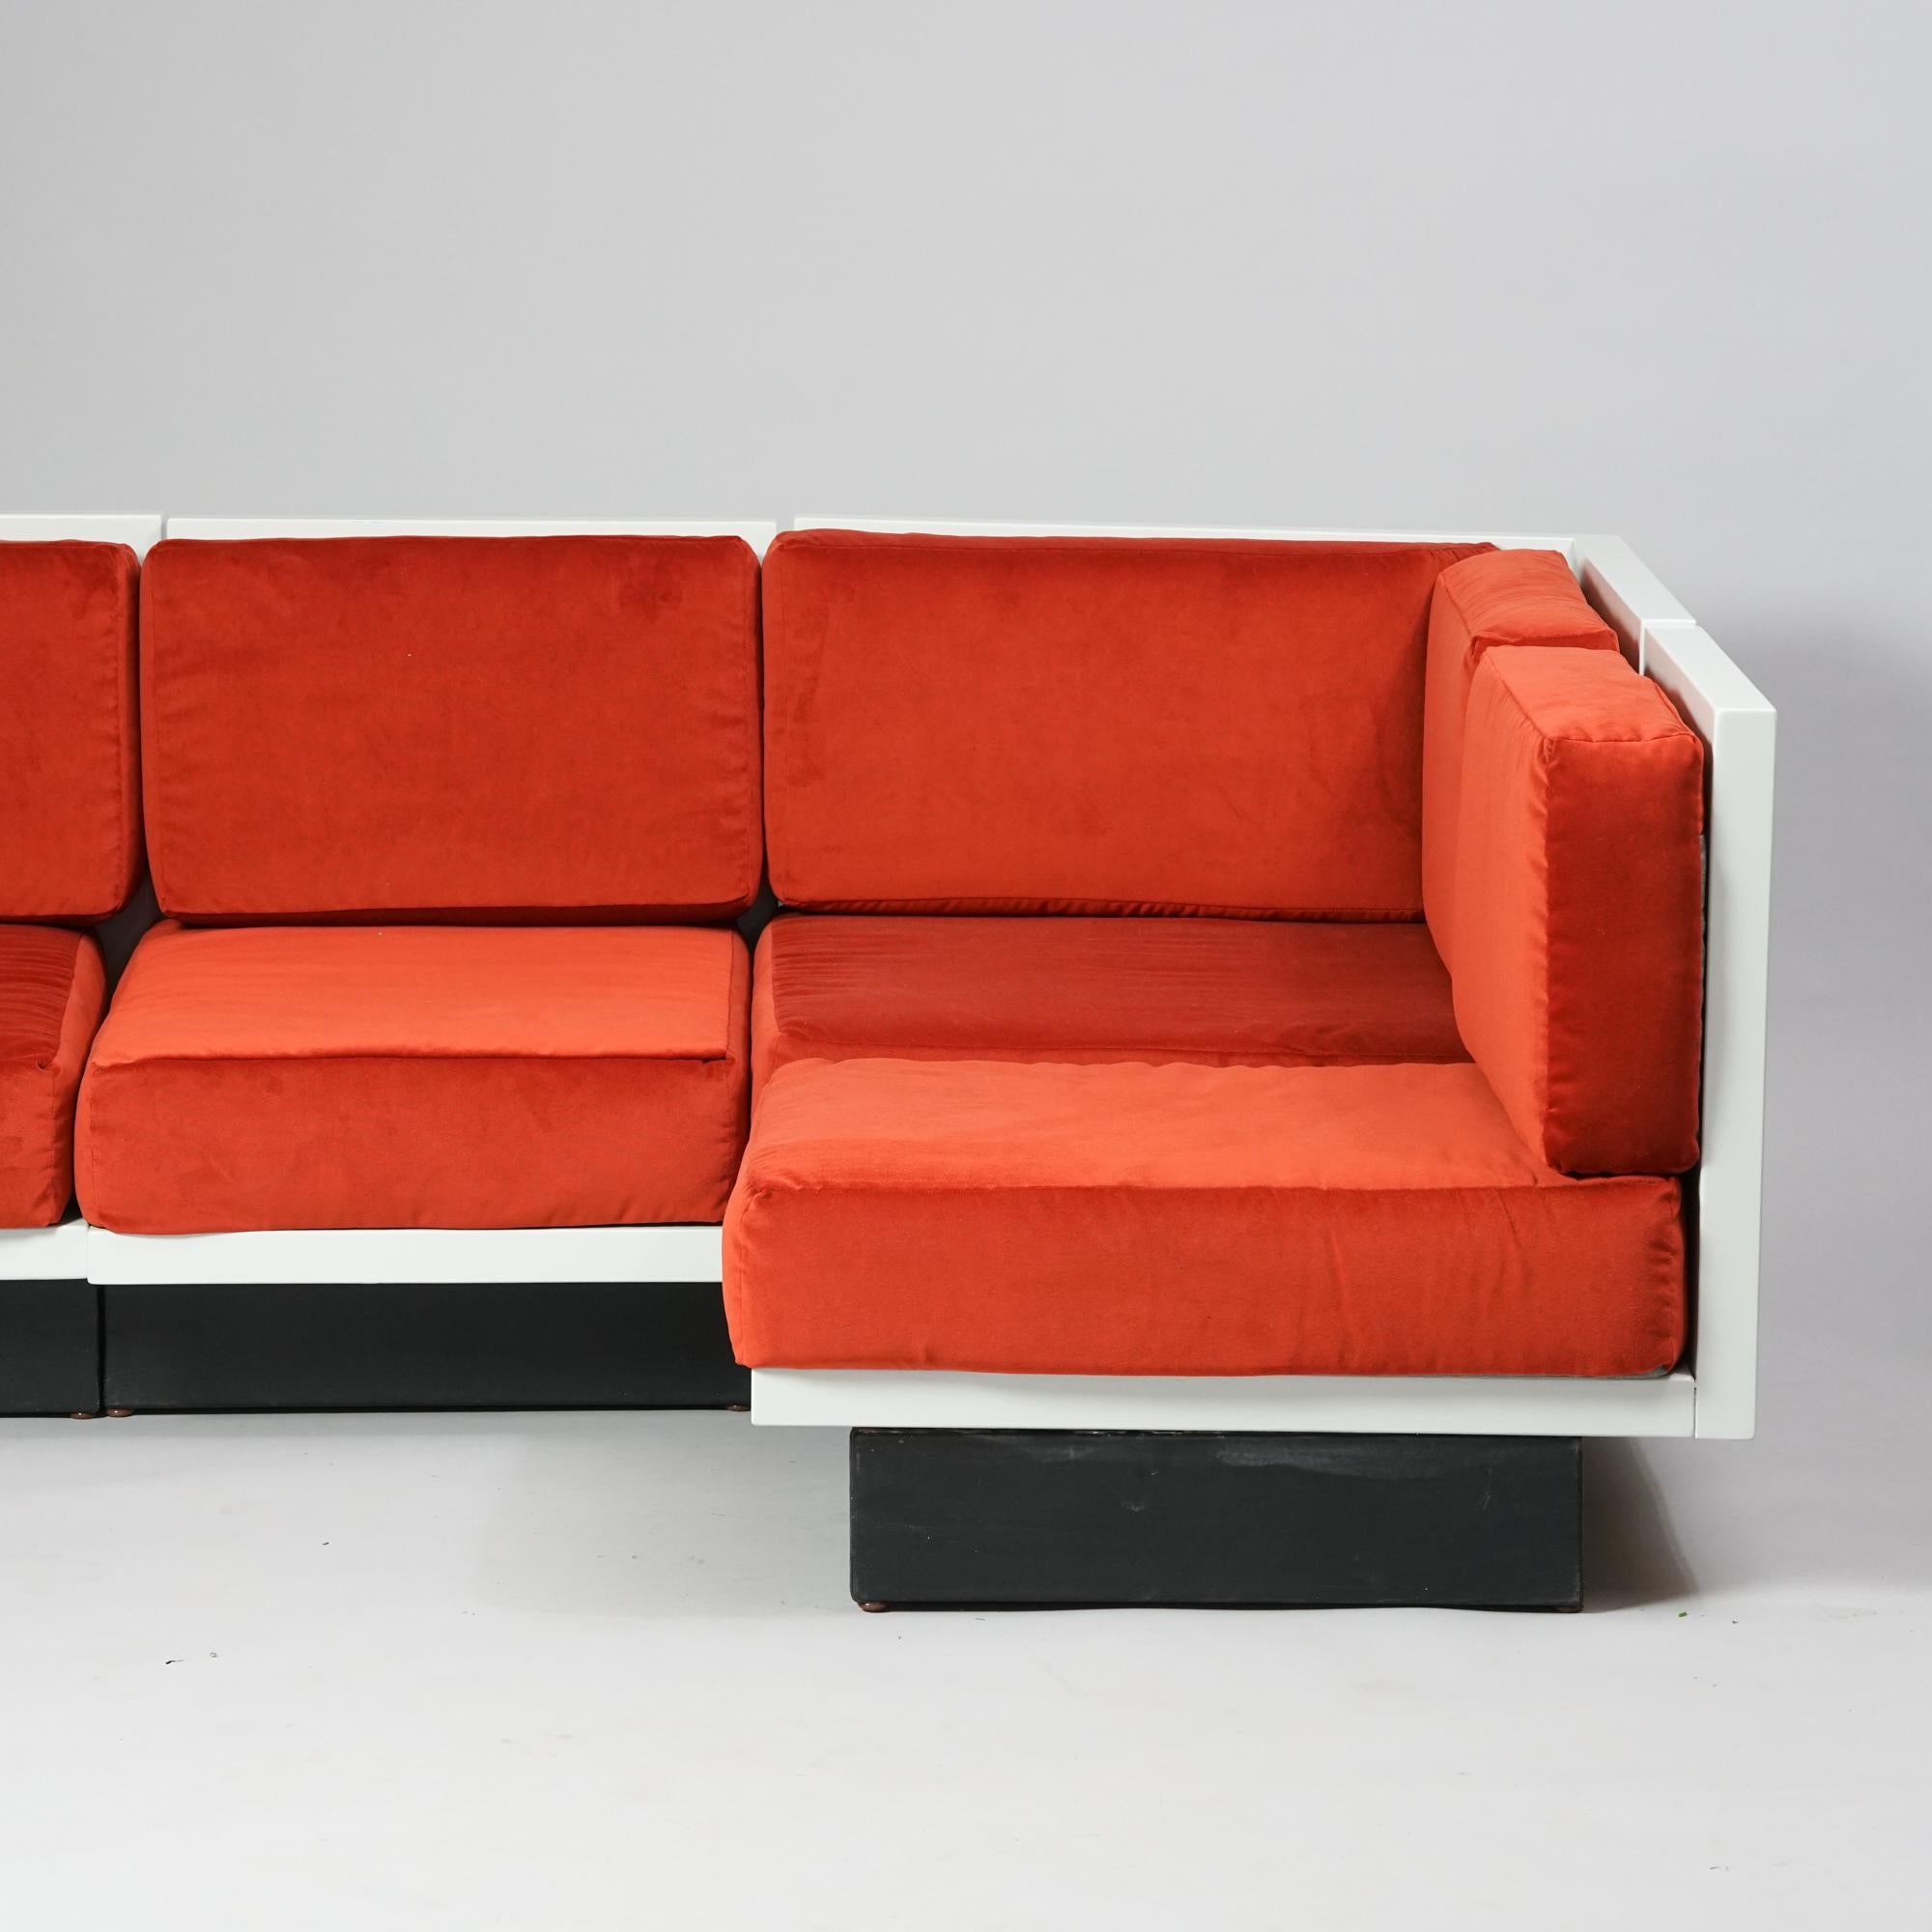 Modular Couch by Ahti Taskinen for Asko from the 1970s. Re-upholstered with Lauritzon Elysee fabric, re-painted frame. Consisting of two corner pieces and seven modular pieces. Good vintage condition. 

Measurements for one module piece : width 55